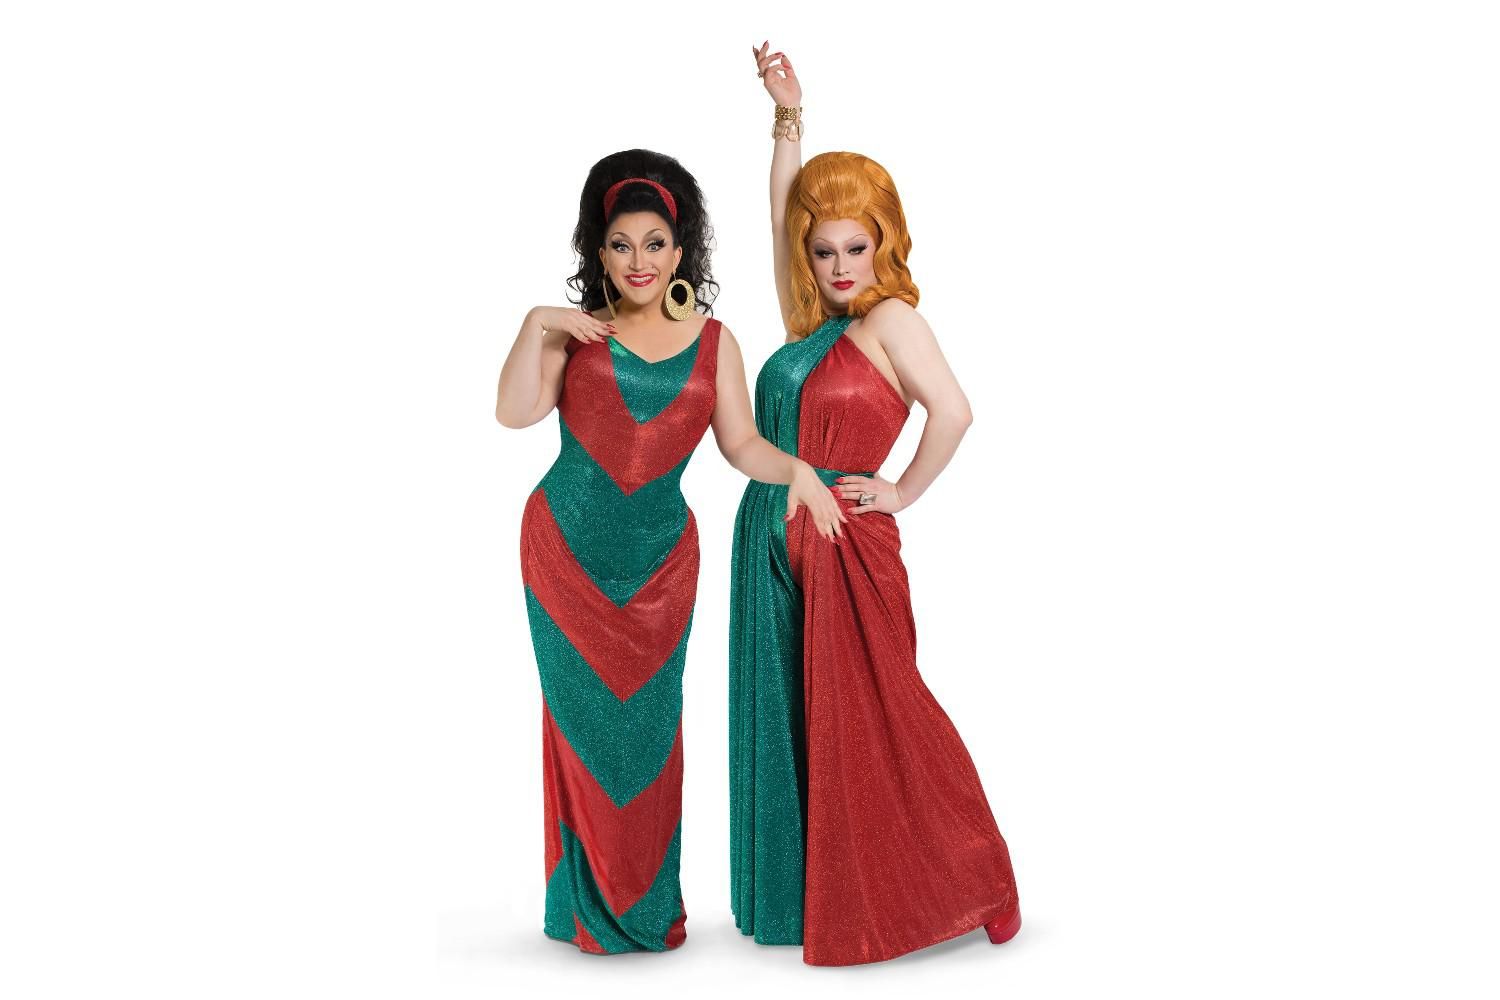 Jinkx Monsoon and BenDeLaCreme posing for their holiday show.